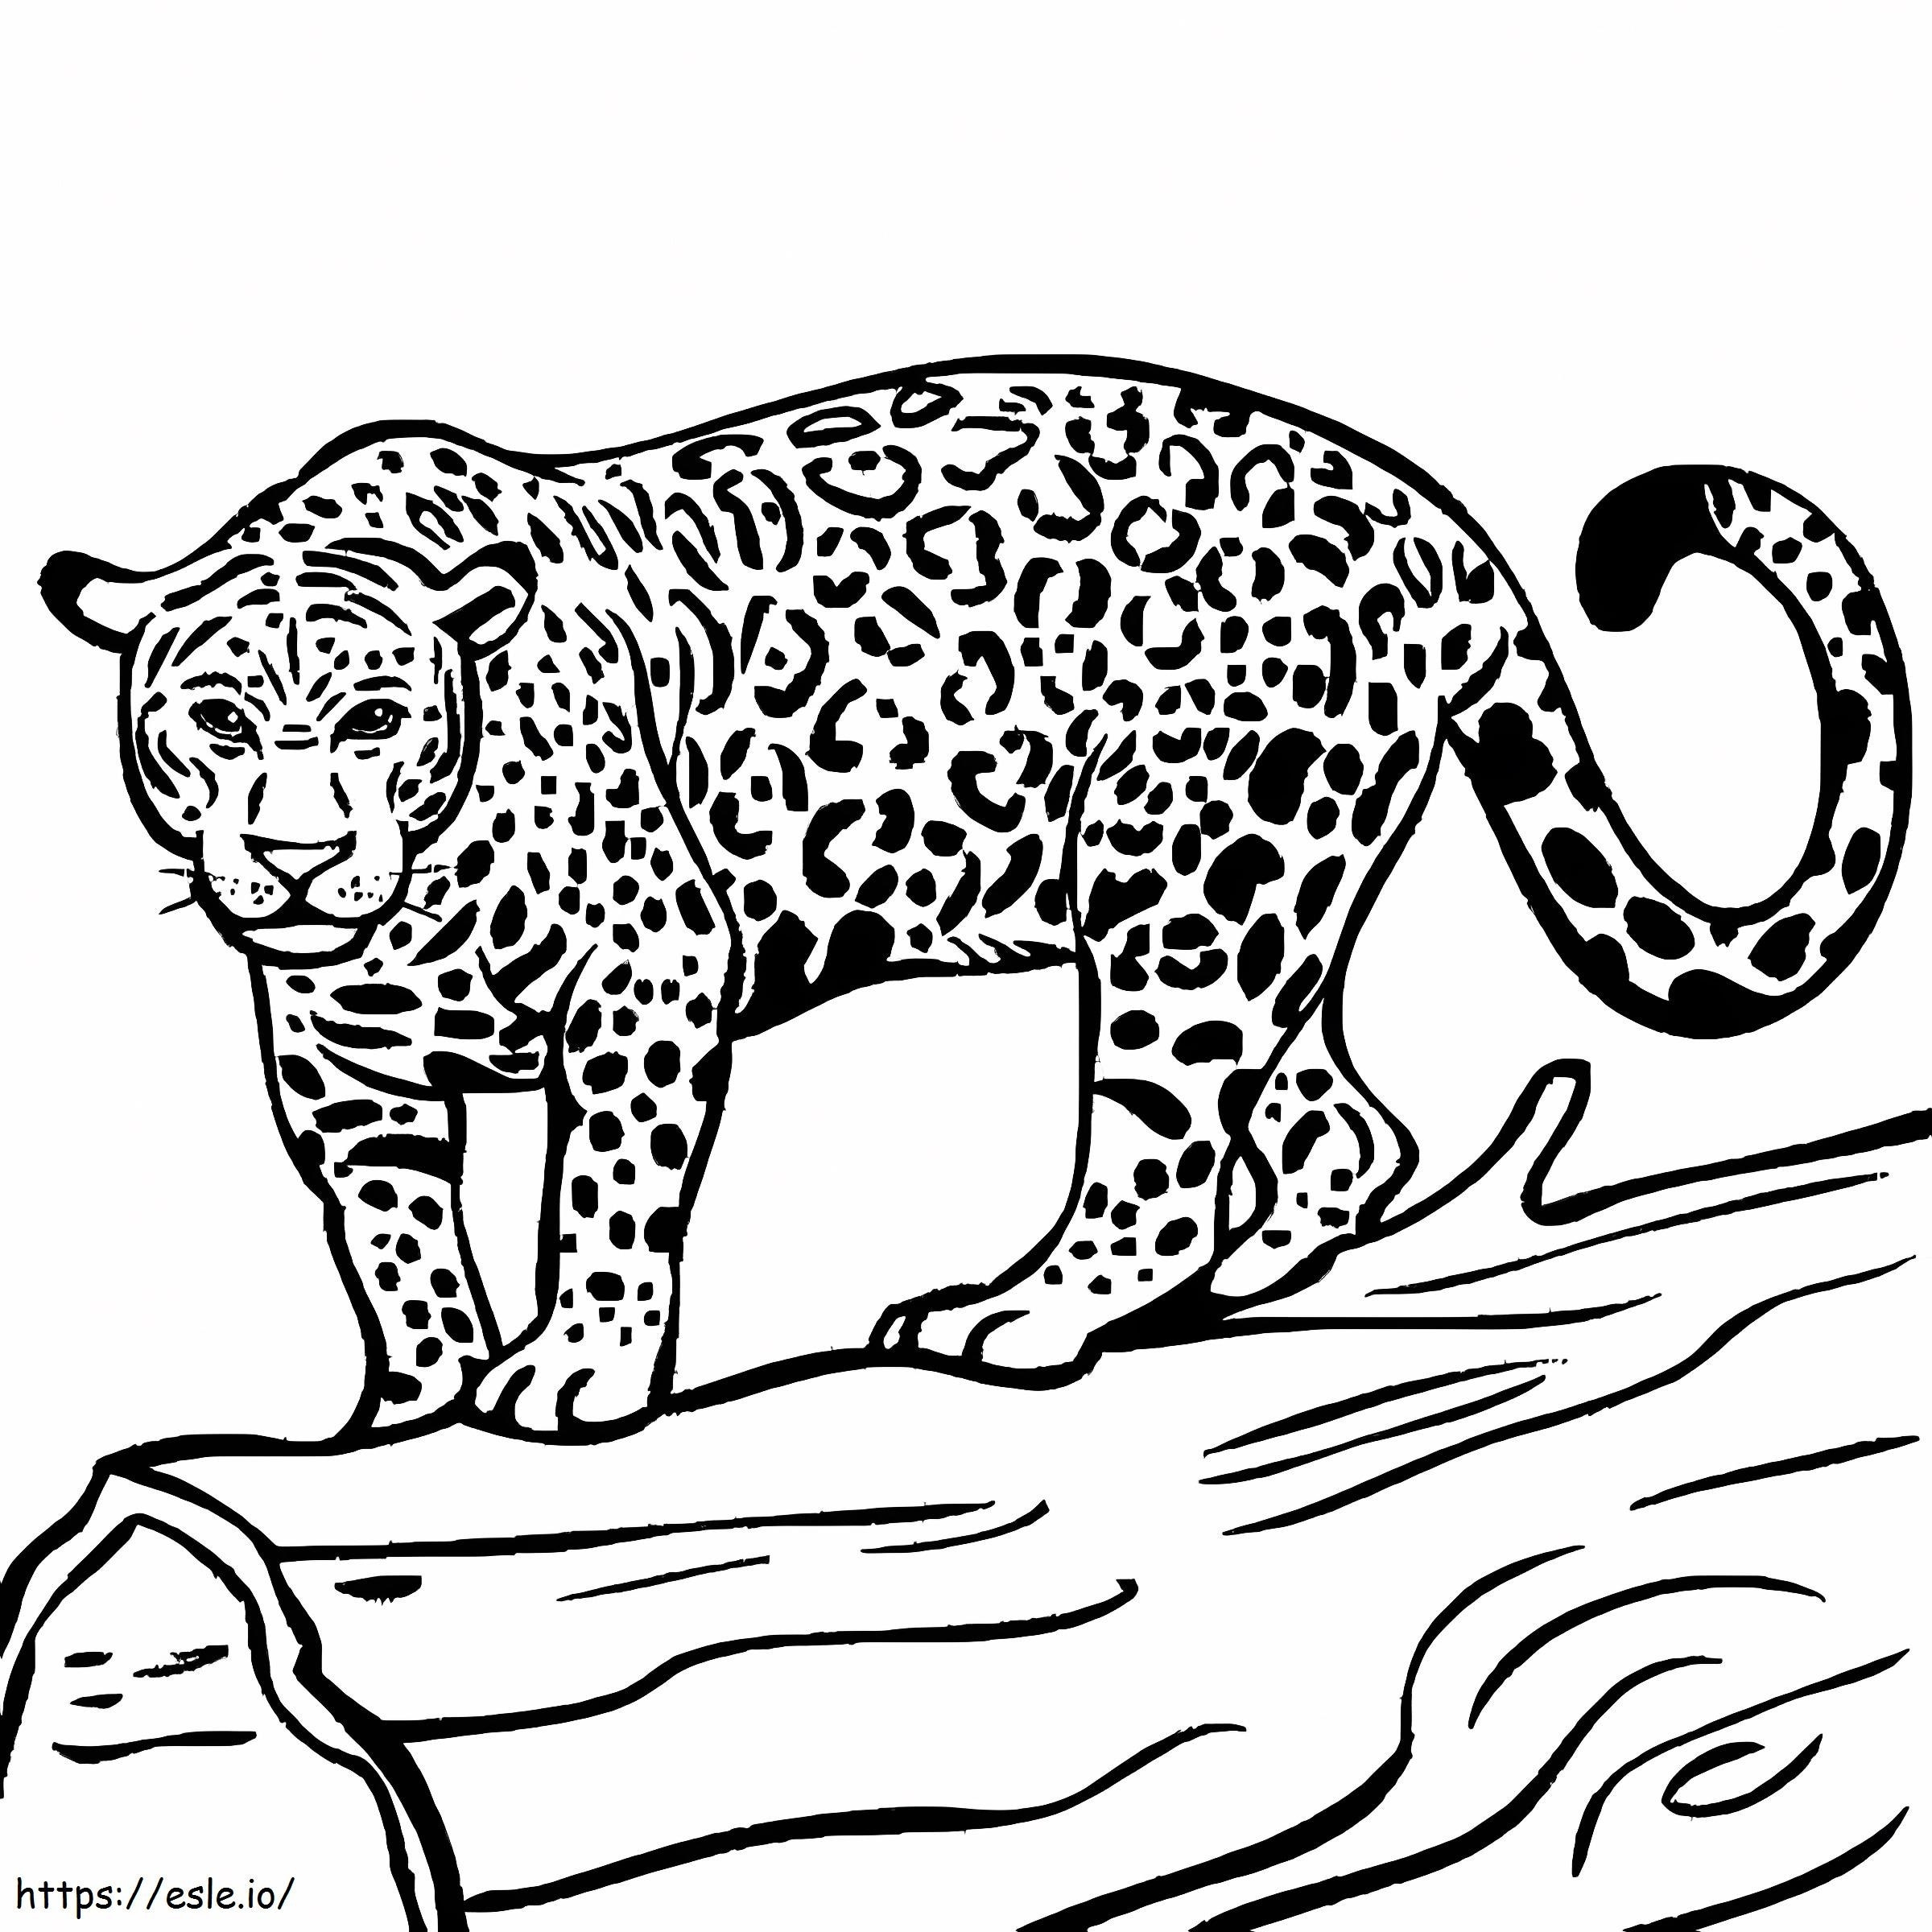 Jaguar Ready To Hunt coloring page